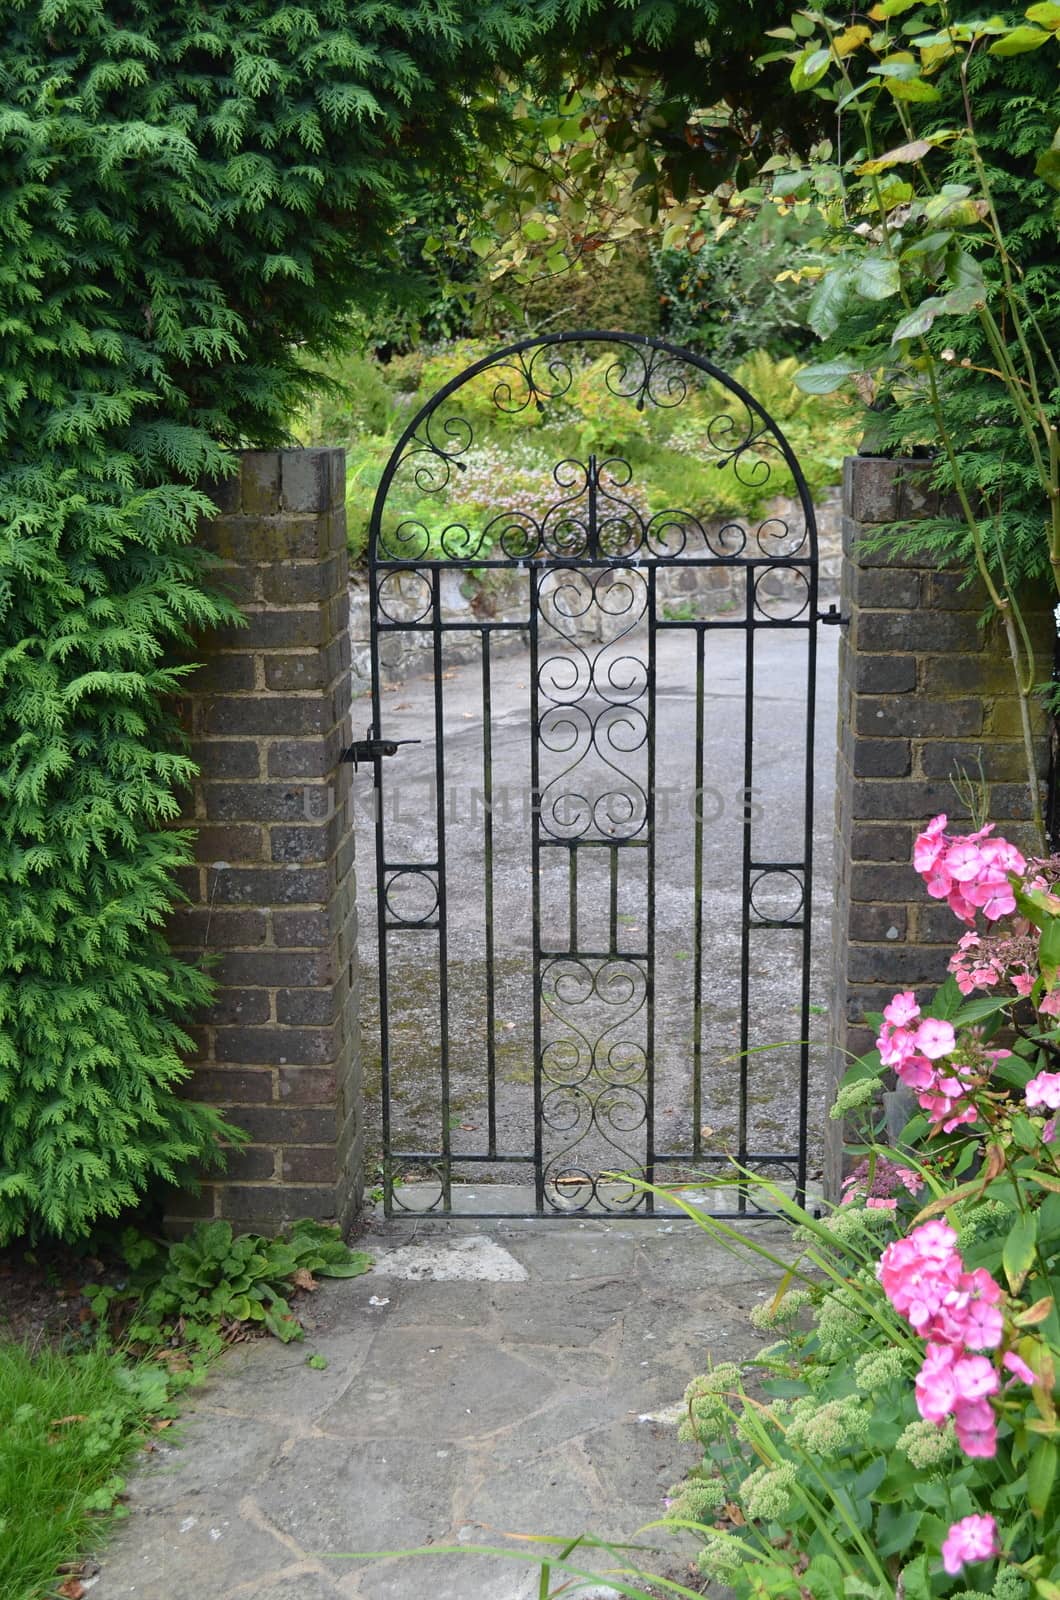 Iron gate at a private home with flowers and brick surround.